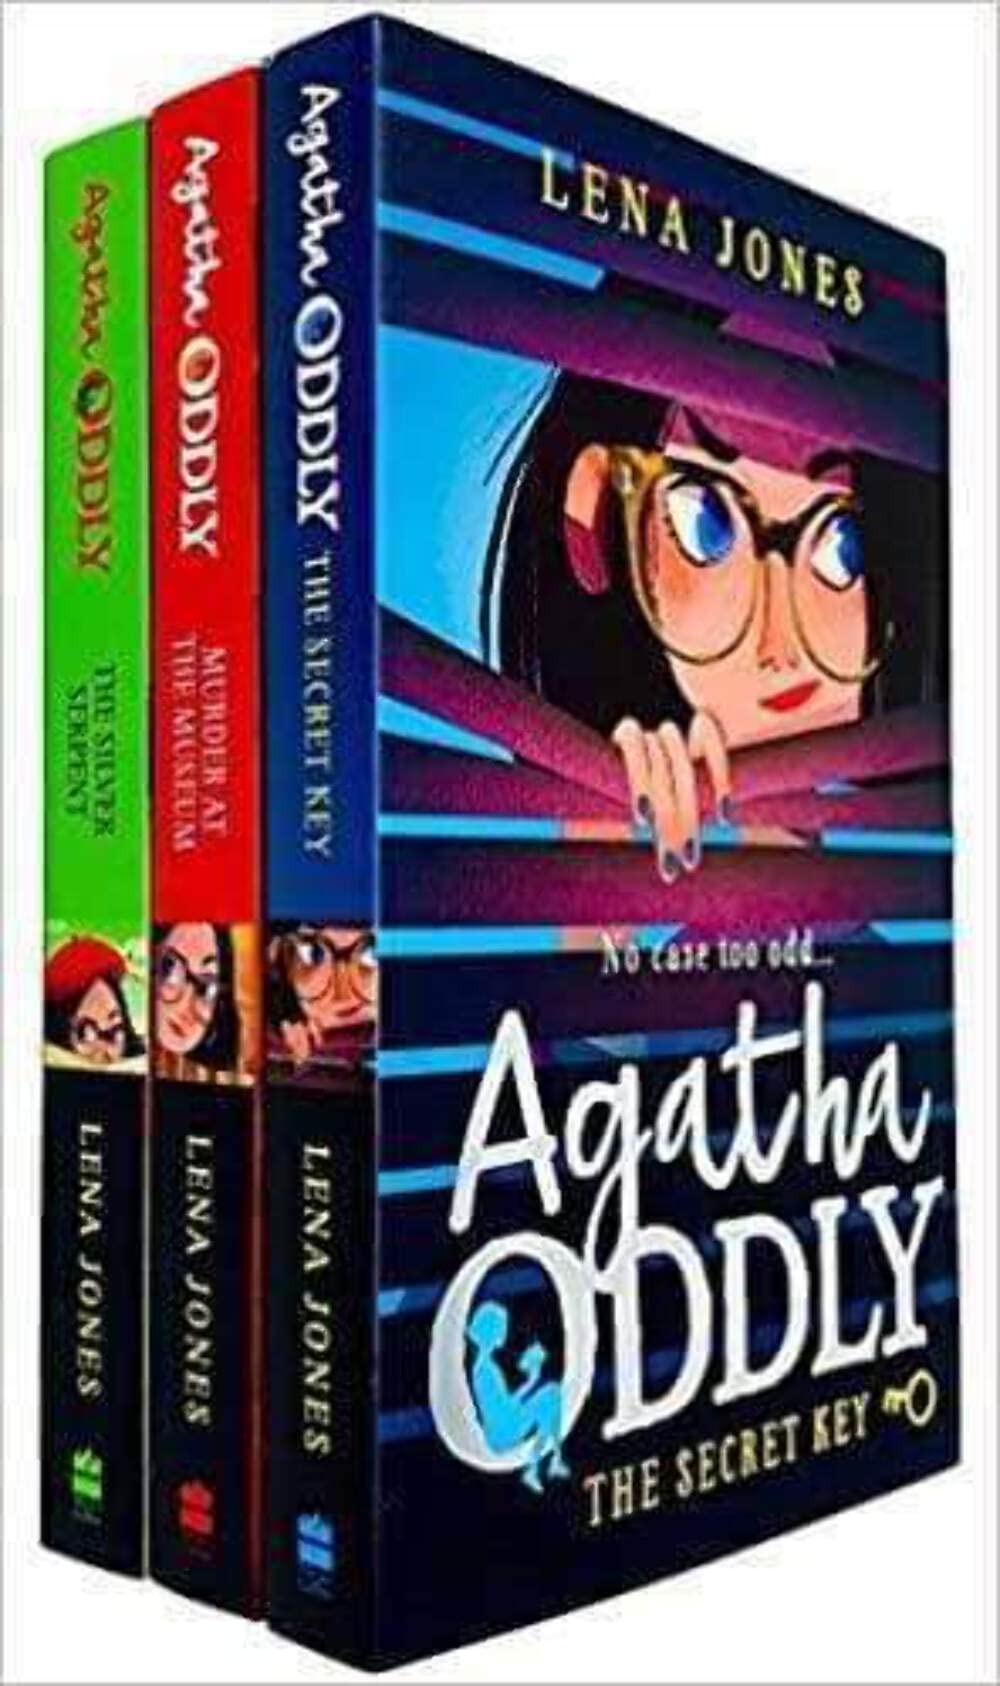 Agatha Oddly Detective Series by Lena Jones 3 Books Collection Set - Lets Buy Books